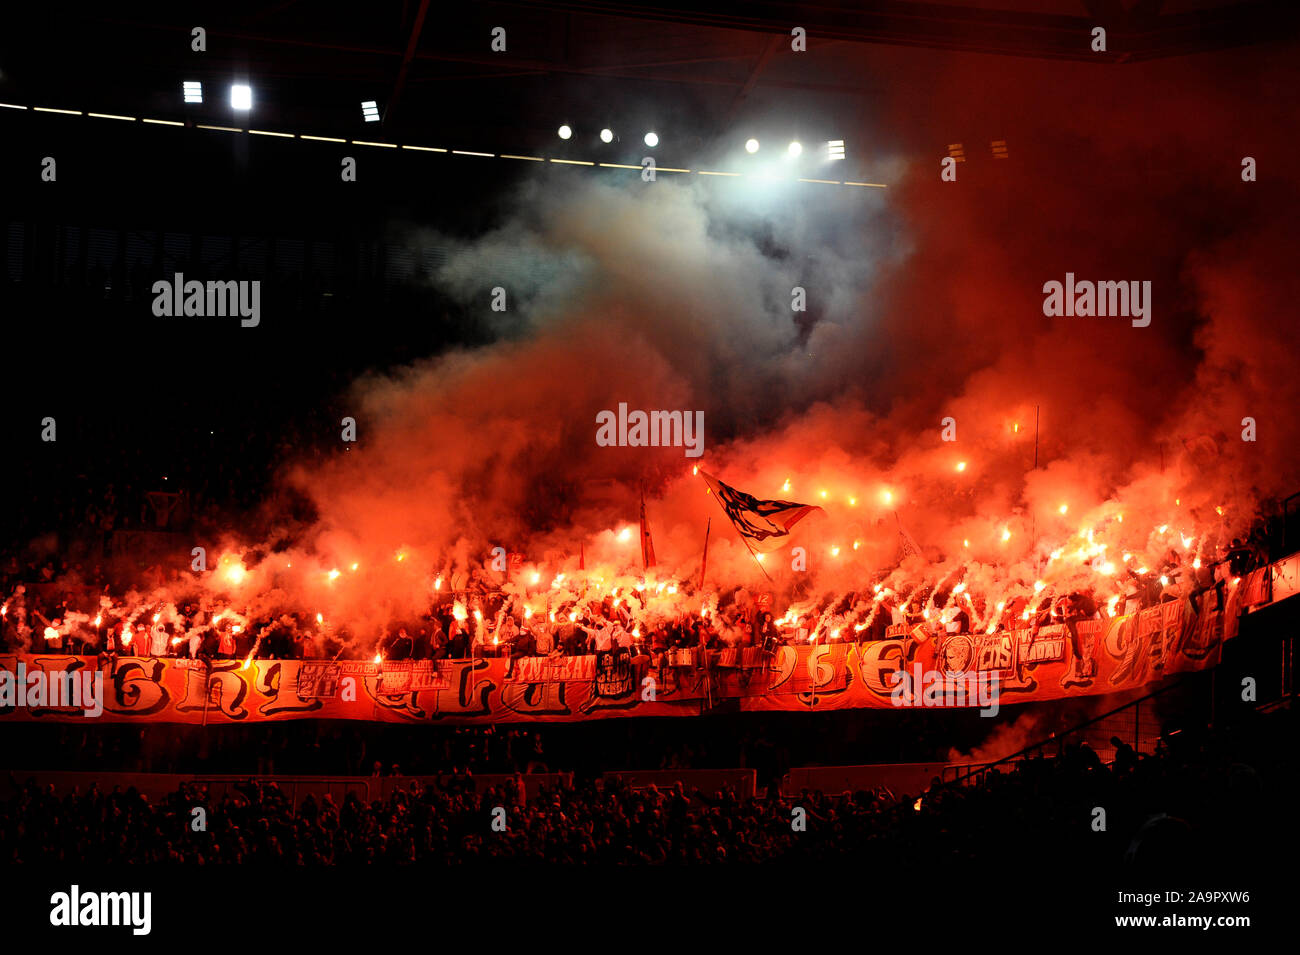 Merkur Spielarena Dusseldorf Germany, 3.11.2019,  Football: German Bundesliga Season 2019/20, matchday 10, Fortuna Dusseldorf (F95) vs 1.FC Koln (Cologne, CGN): the curve is burning: Cologne ultra supporters light up dozens of flares   DFL REGULATIONS PROHIBIT ANY USE OF PHOTOGRAPHS AS IMAGE SEQUENCES AND/OR QUASI-VIDEO Stock Photo